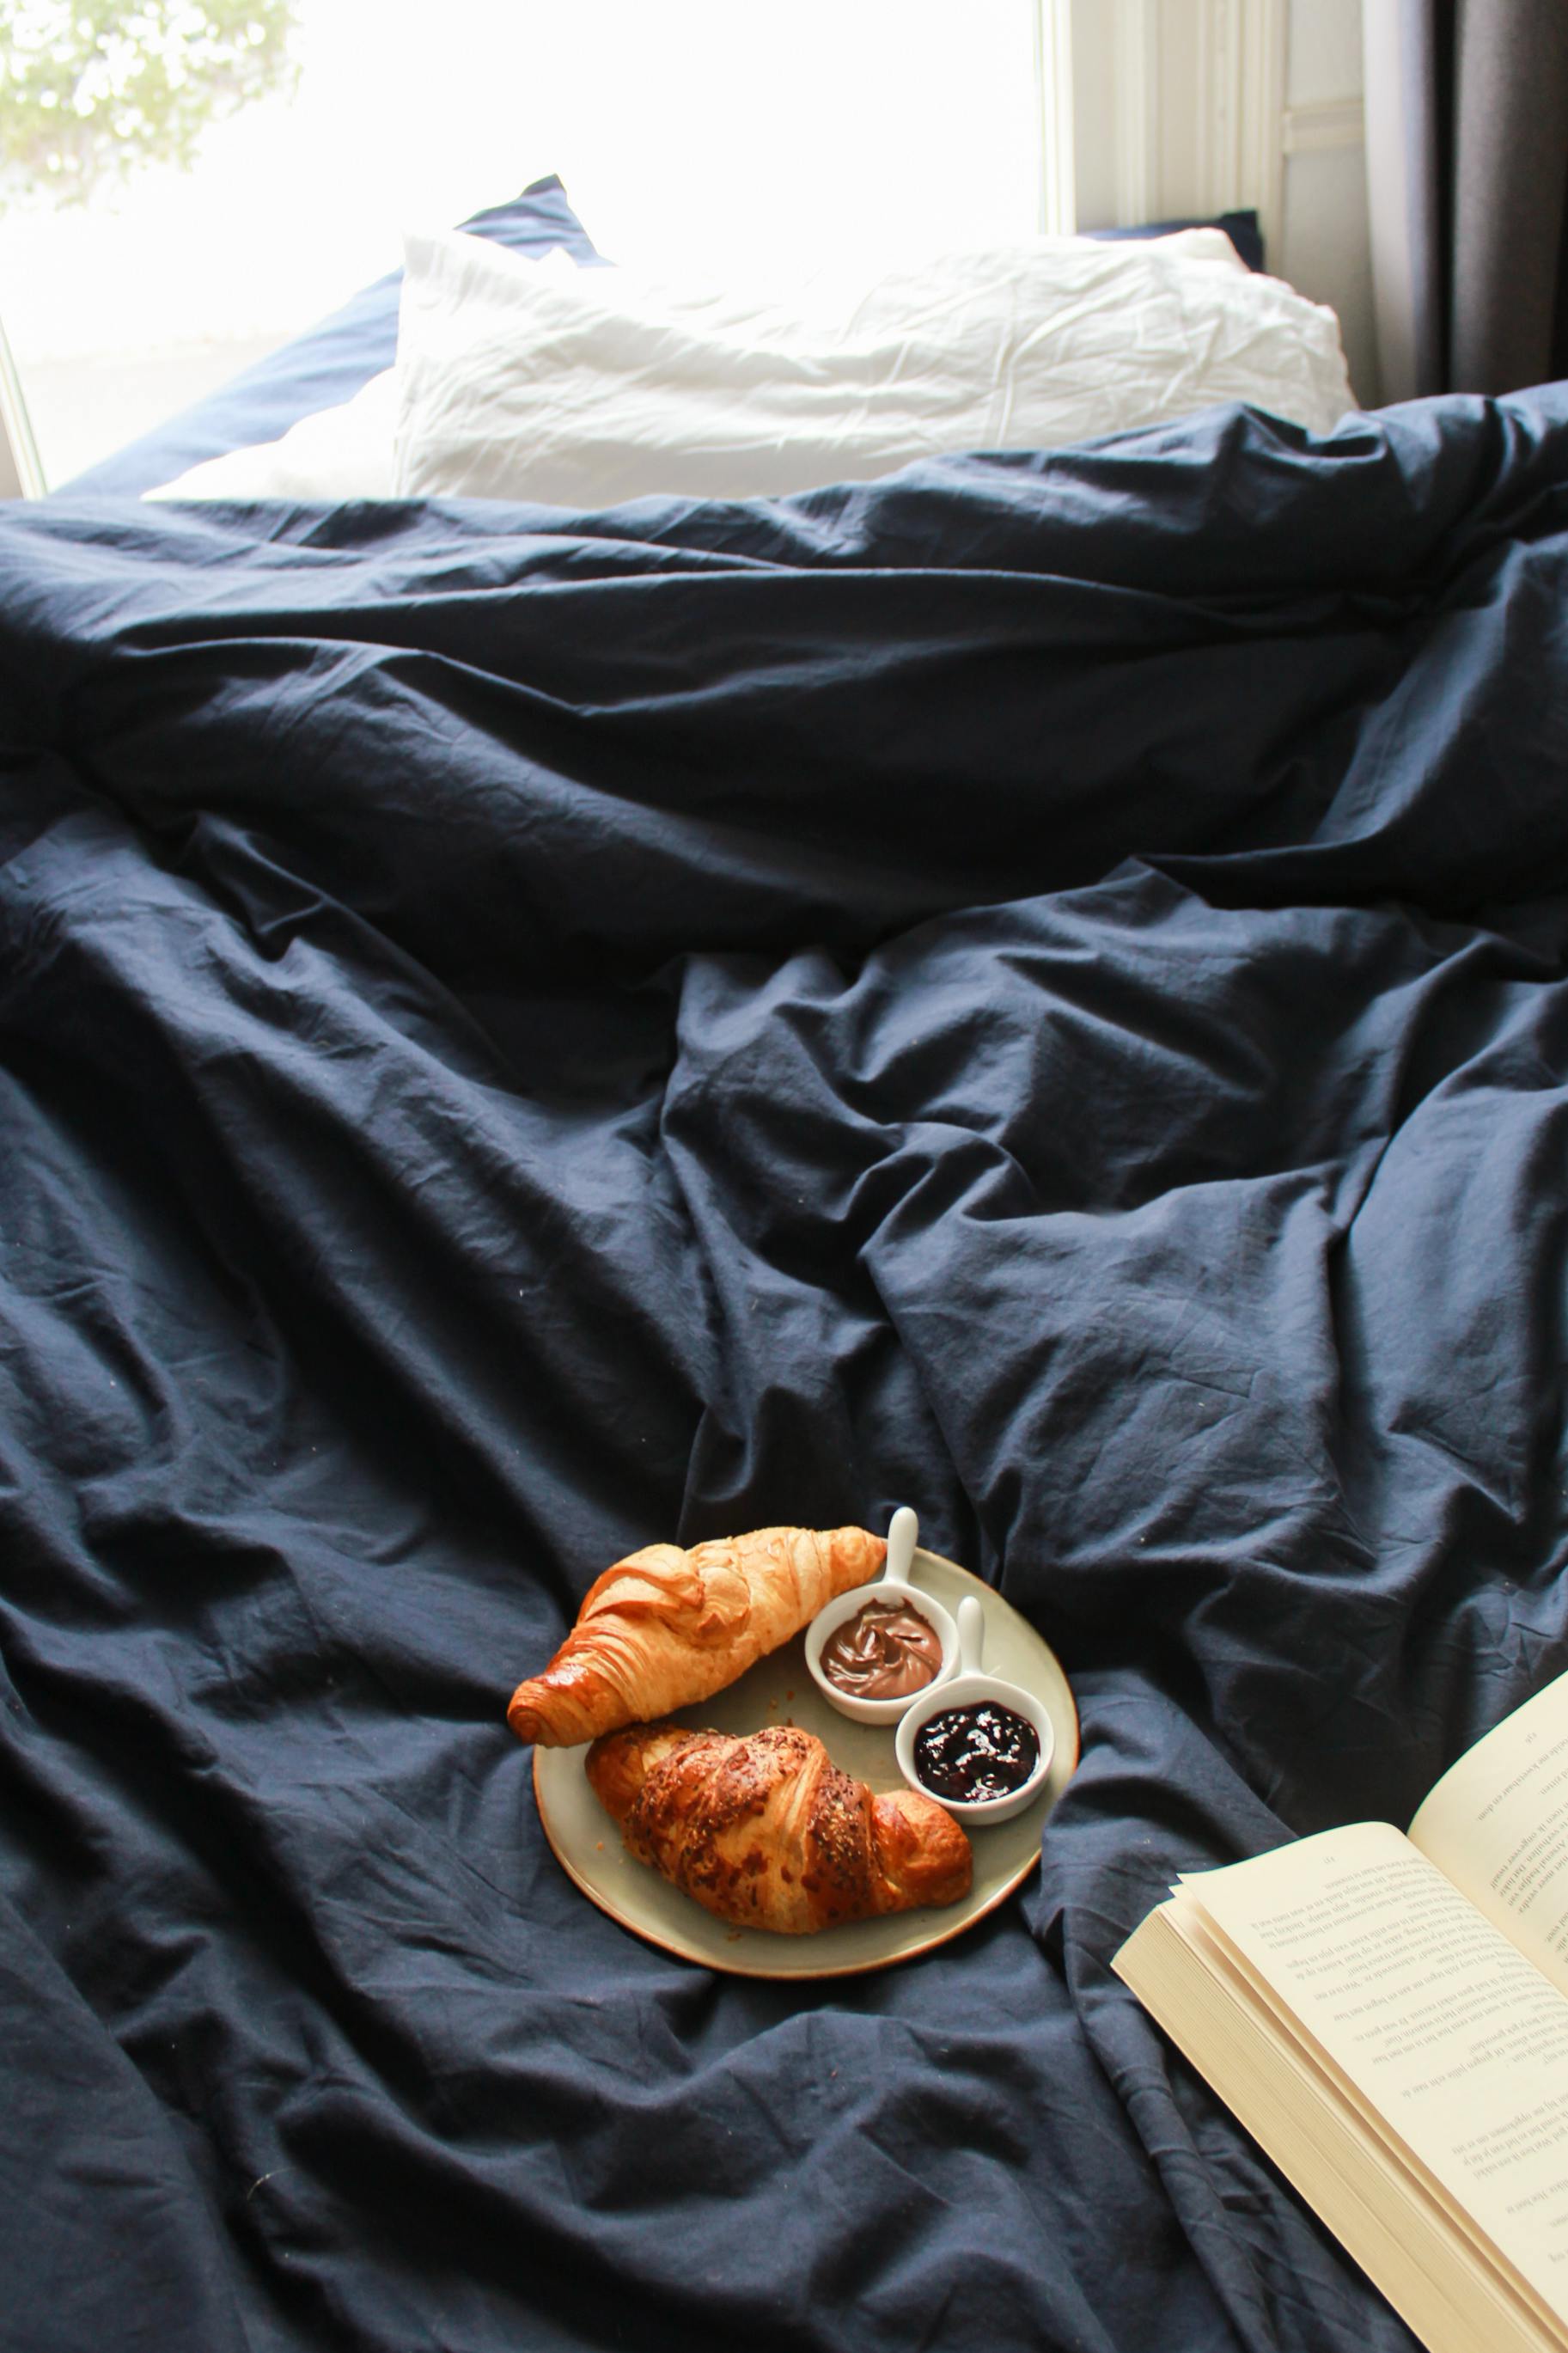 plate with croissants and jam on bed